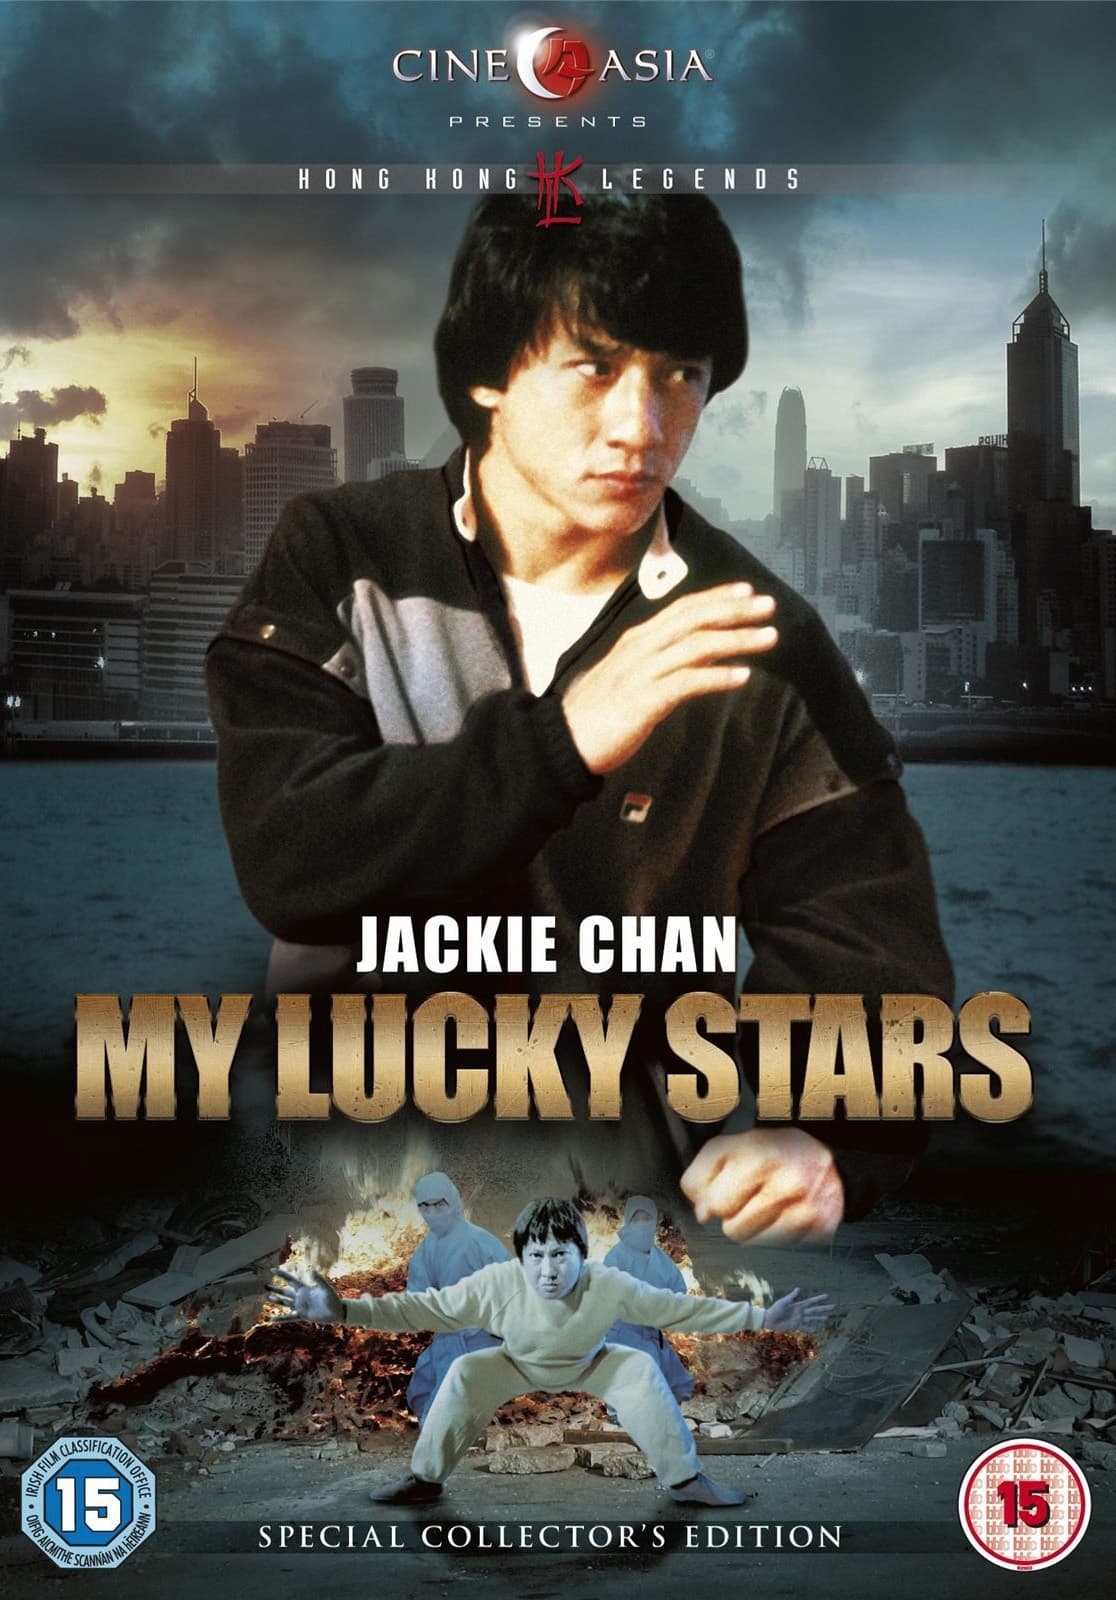 EN - My Lucky Stars (1985) JACKIE CHAN (ENG-SUB)